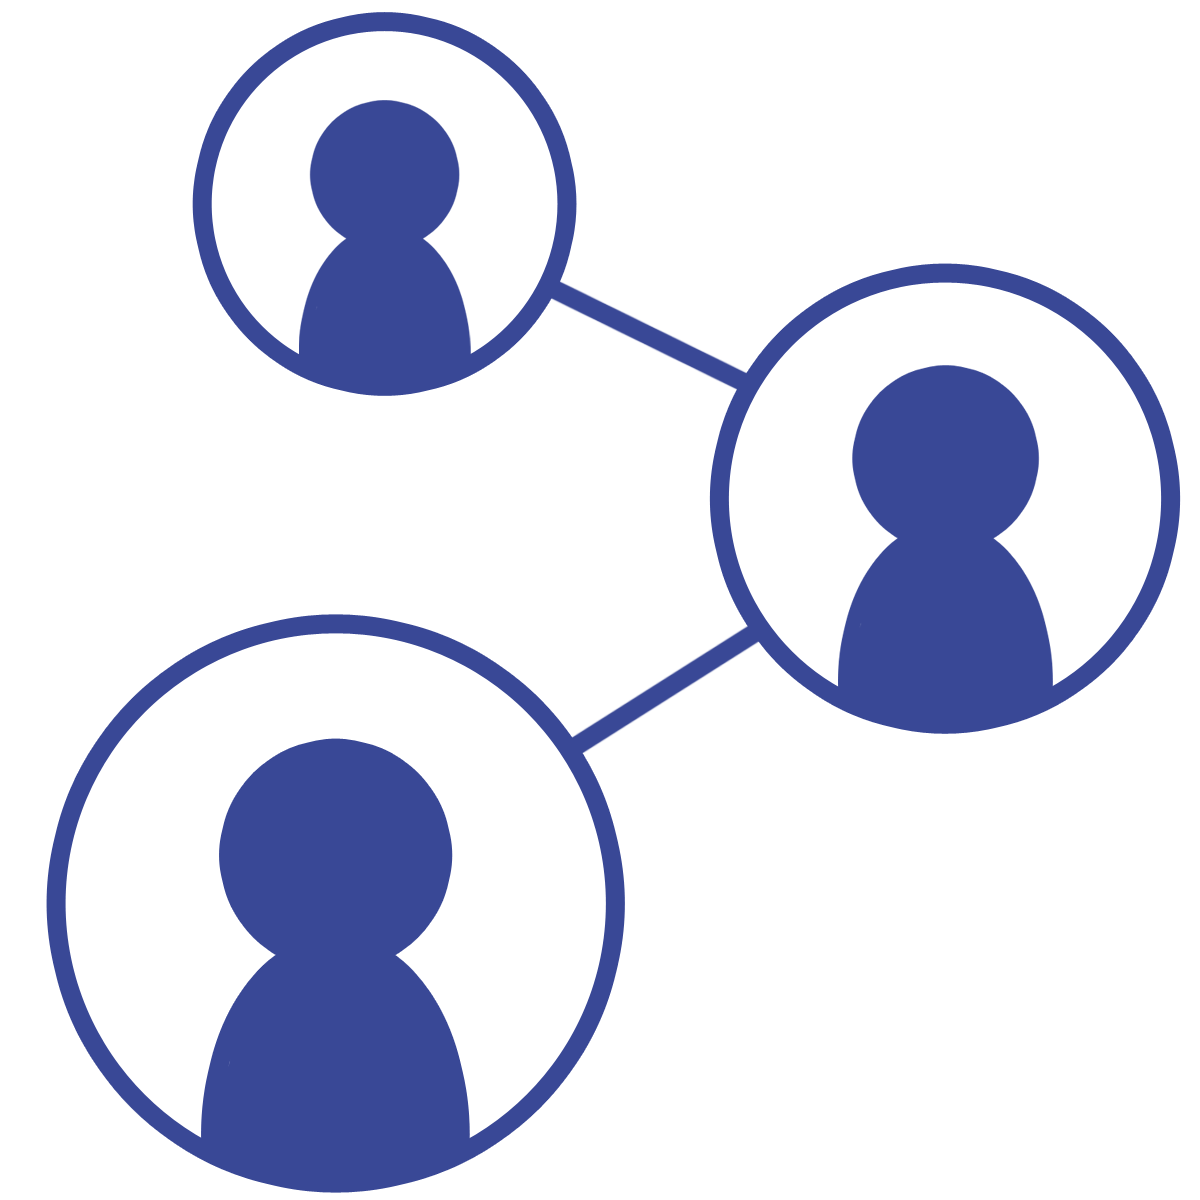 scheme, Business, networking, Circles, Communications, Connection 